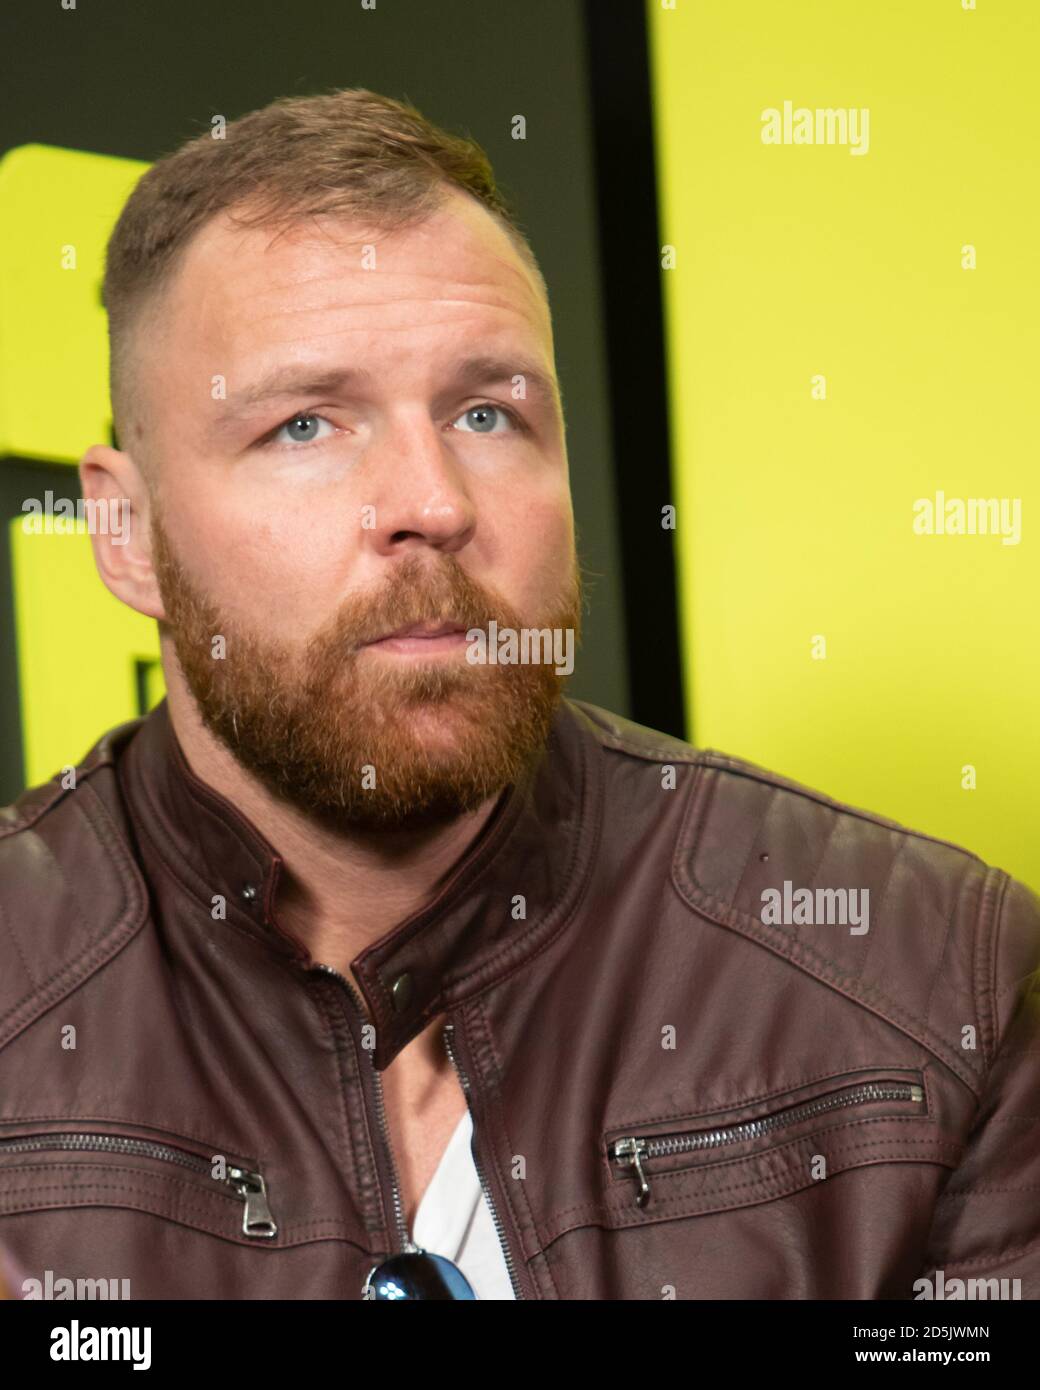 jon-moxley-of-aew-shows-up-at-ny-comic-con-in-2019-2D5JWMN.jpg